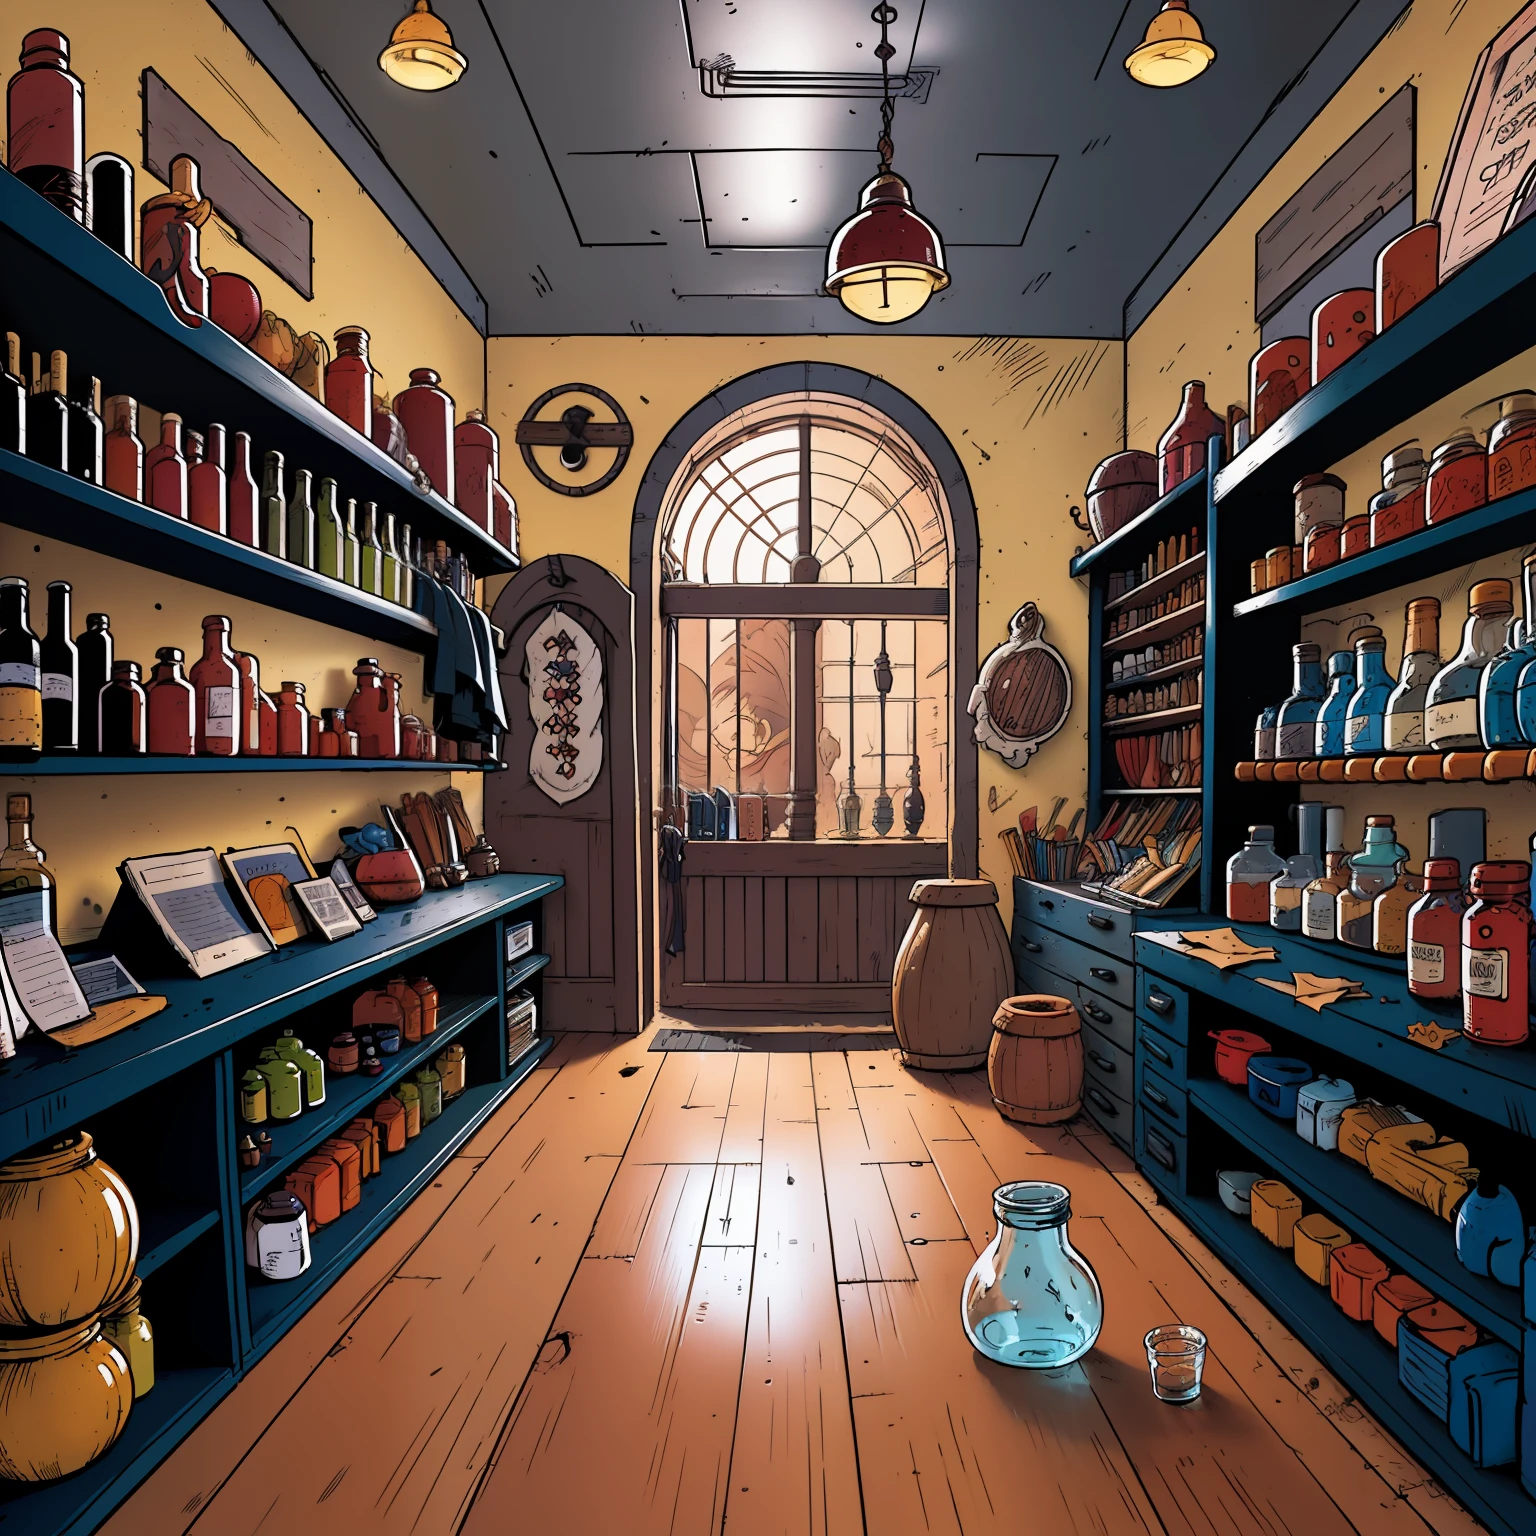 empty potions shop, a table in the middle of the store,medieval style,side angle,sleeved,Akira Toriyama's trait,black andwhite,black and white tone,arte linear,sleeved panel